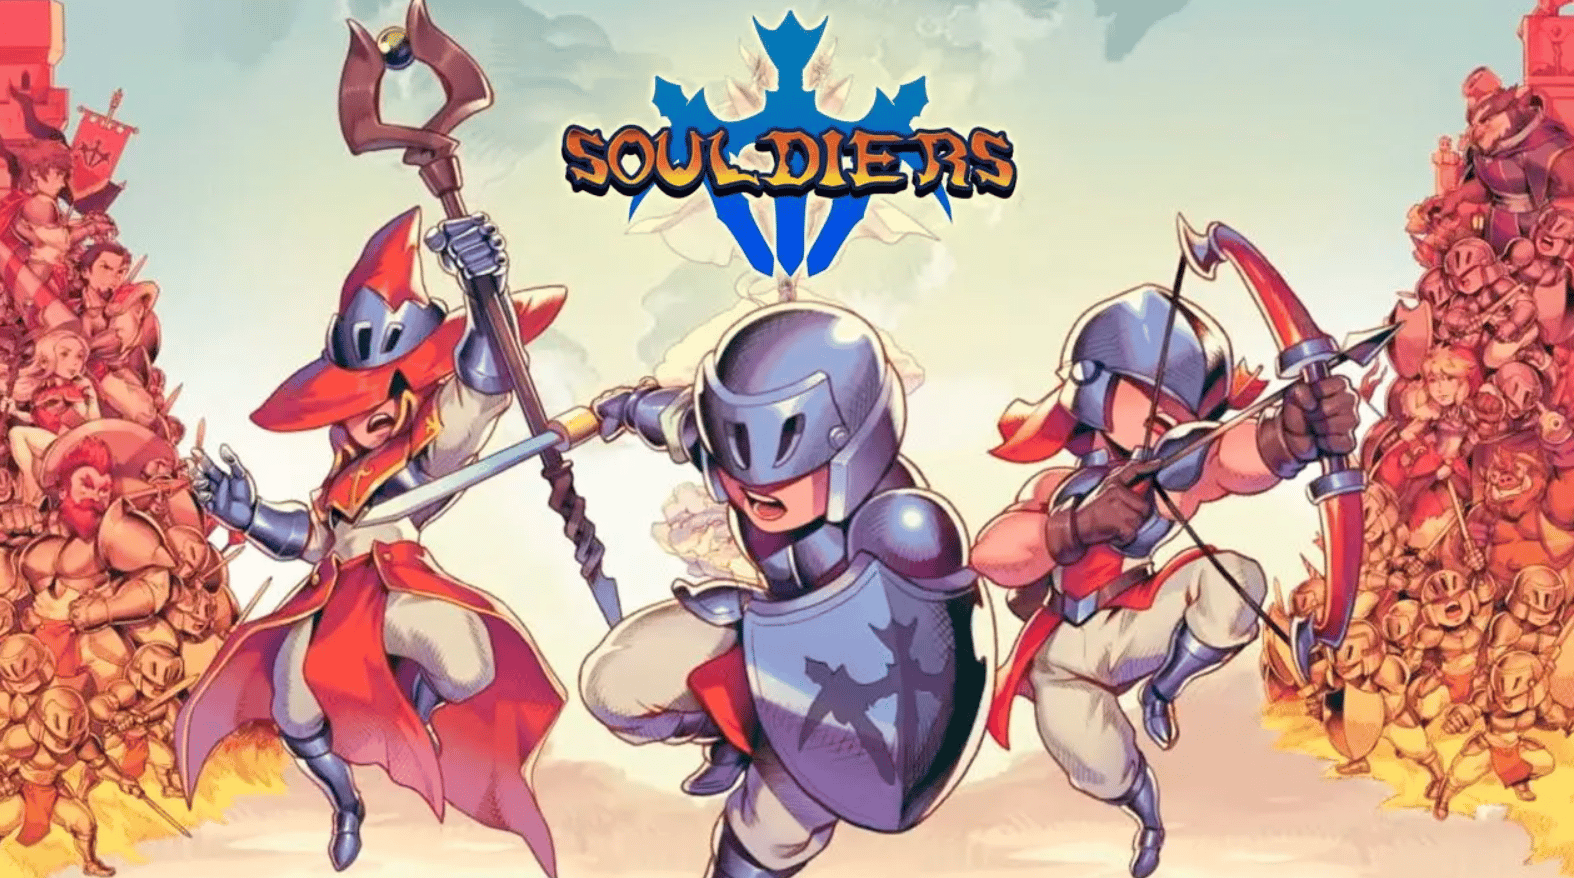 Souldiers Review